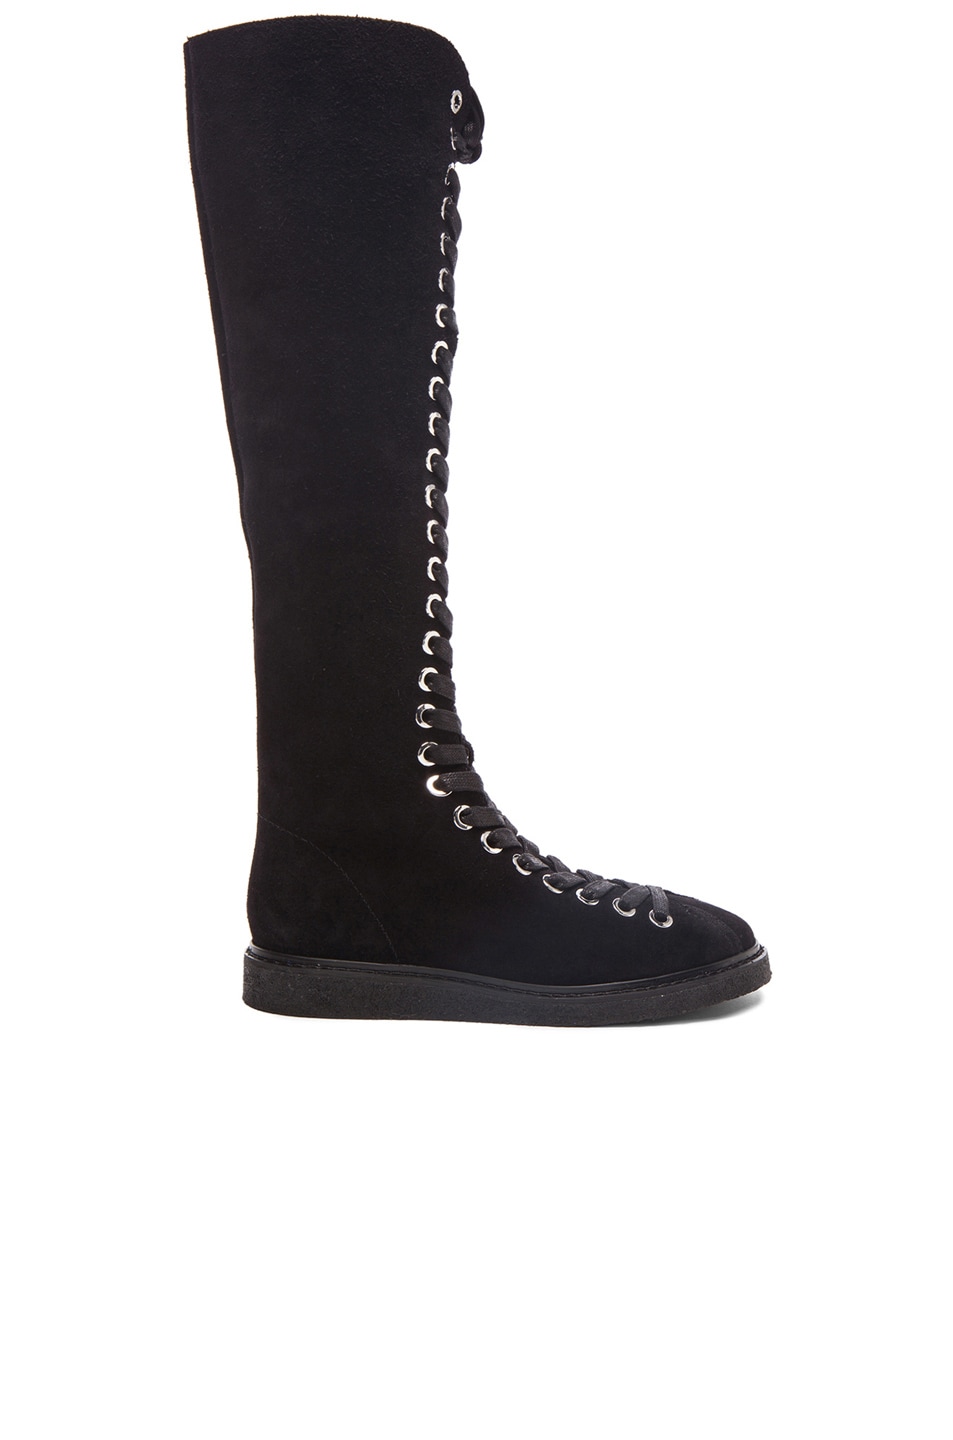 Image 1 of Alexander Wang Emmanuel Suede High Lace Up Boots in Black